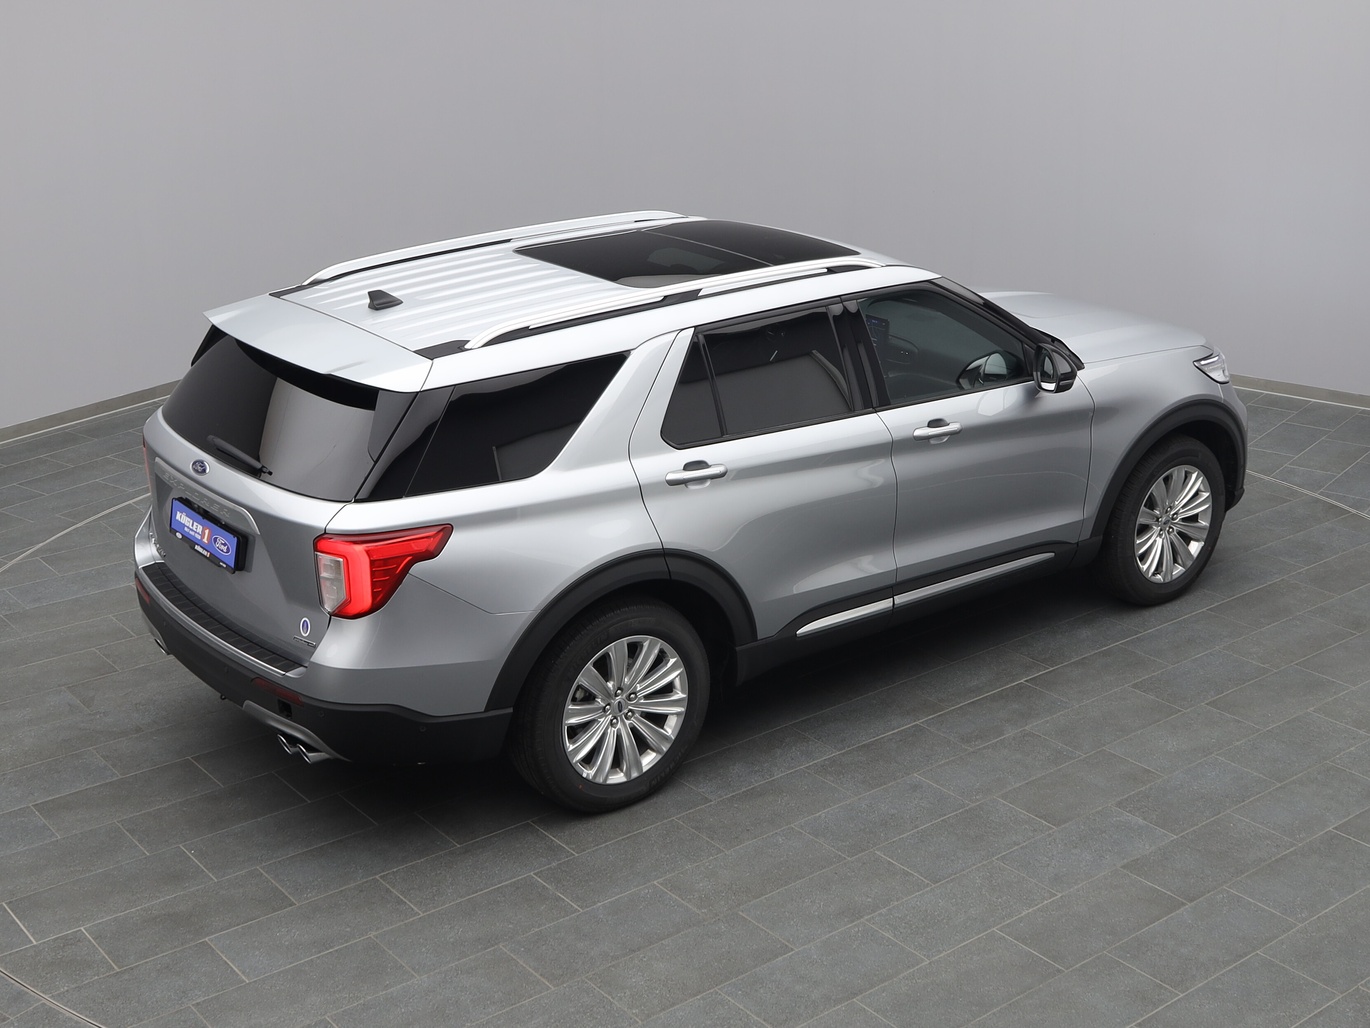  Ford Explorer Platinum 457PS Plug-in-Hybrid / AHK in Iconic Silver 